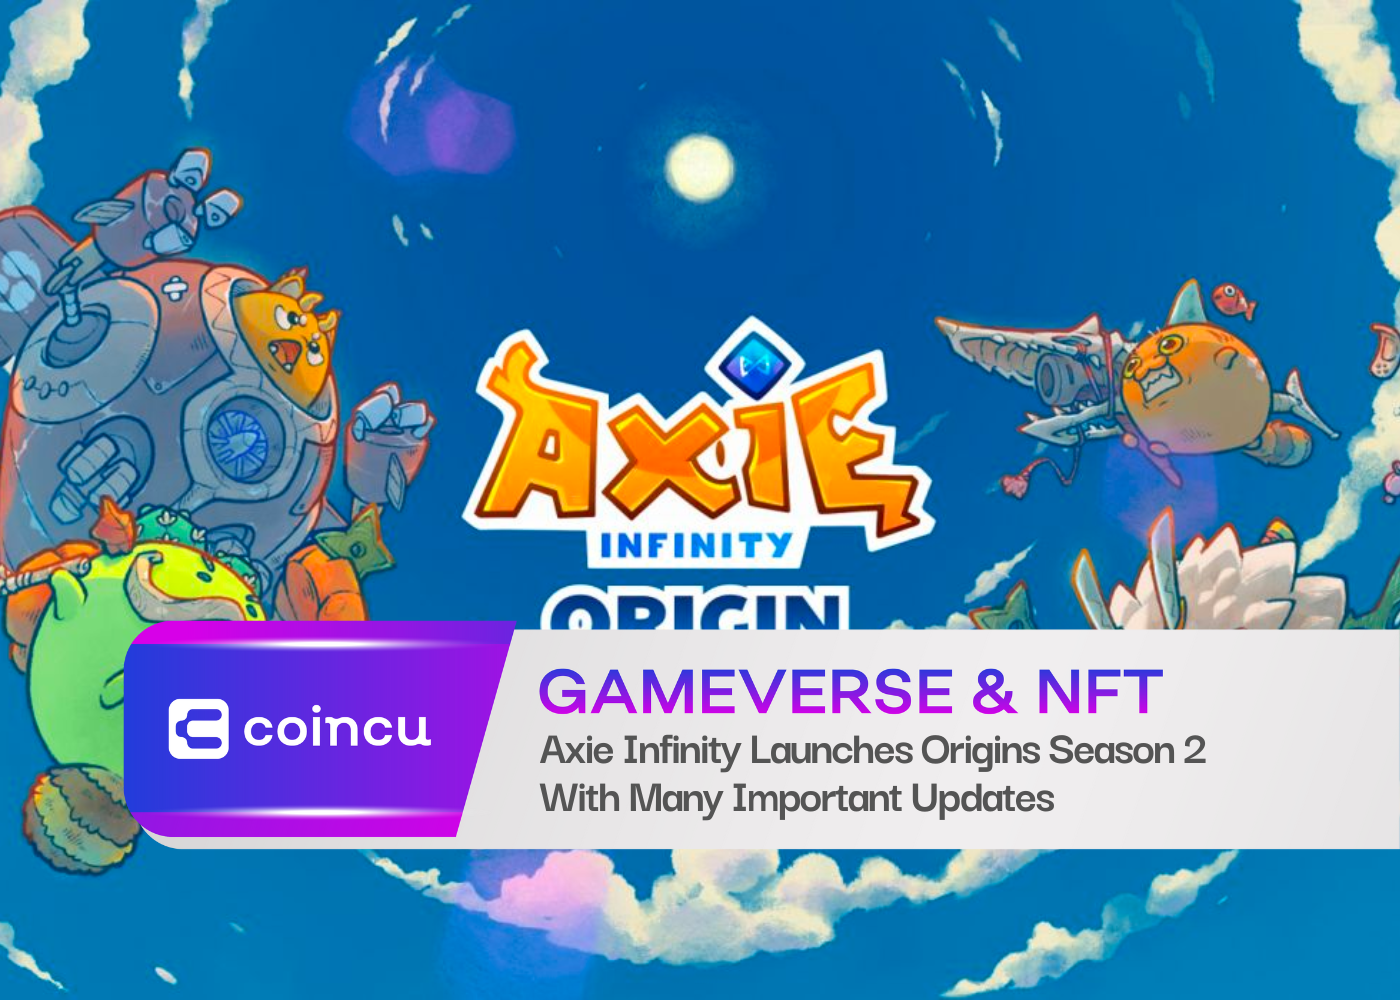 Axie Infinity Launches Origins Season 2 With Many Important Updates